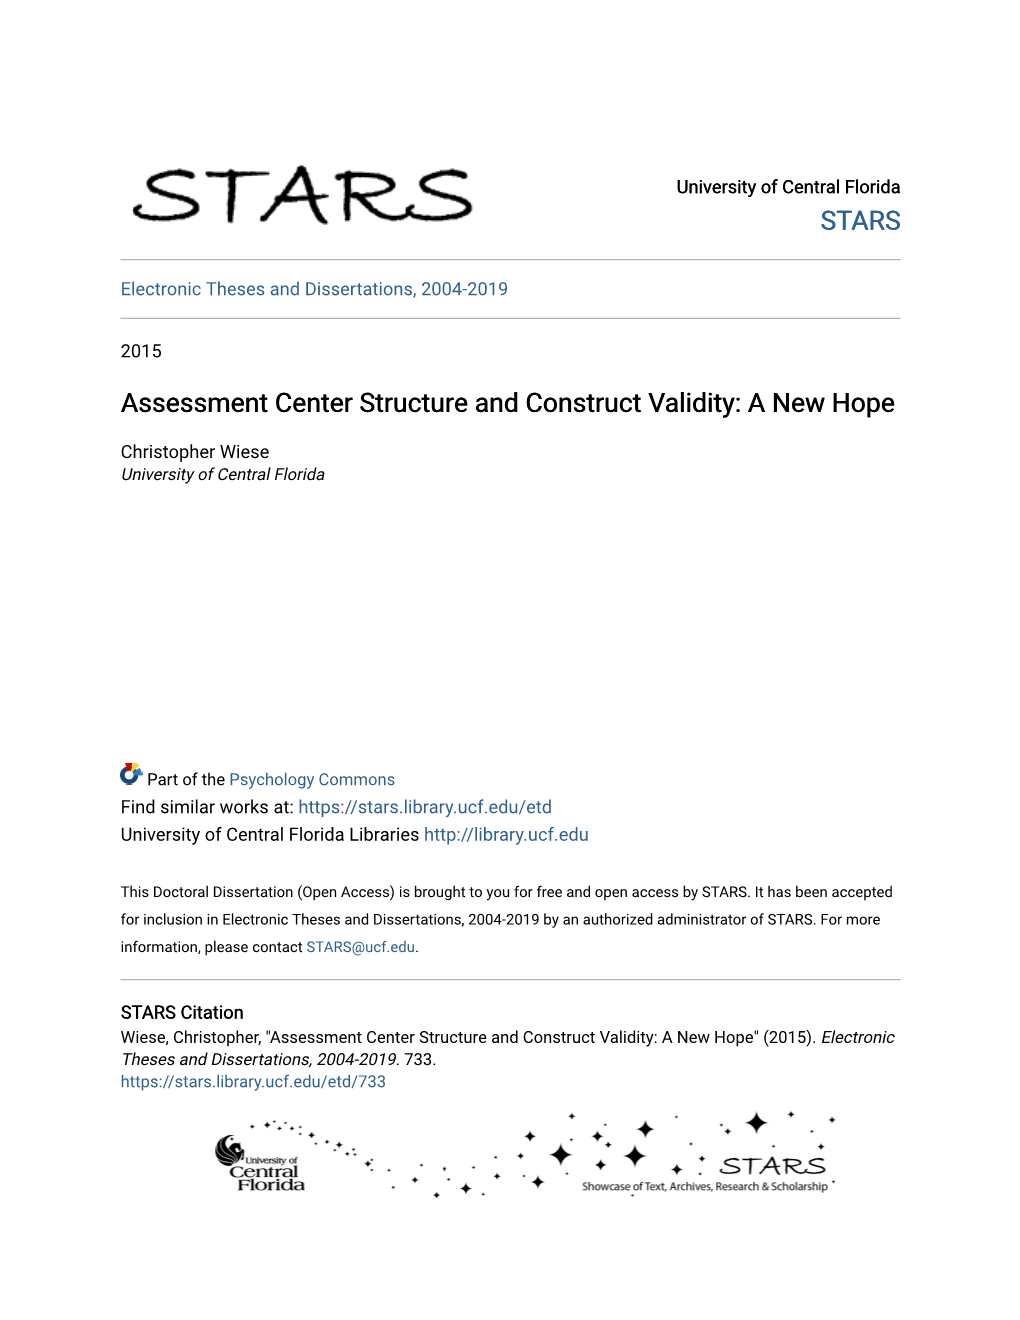 Assessment Center Structure and Construct Validity: a New Hope